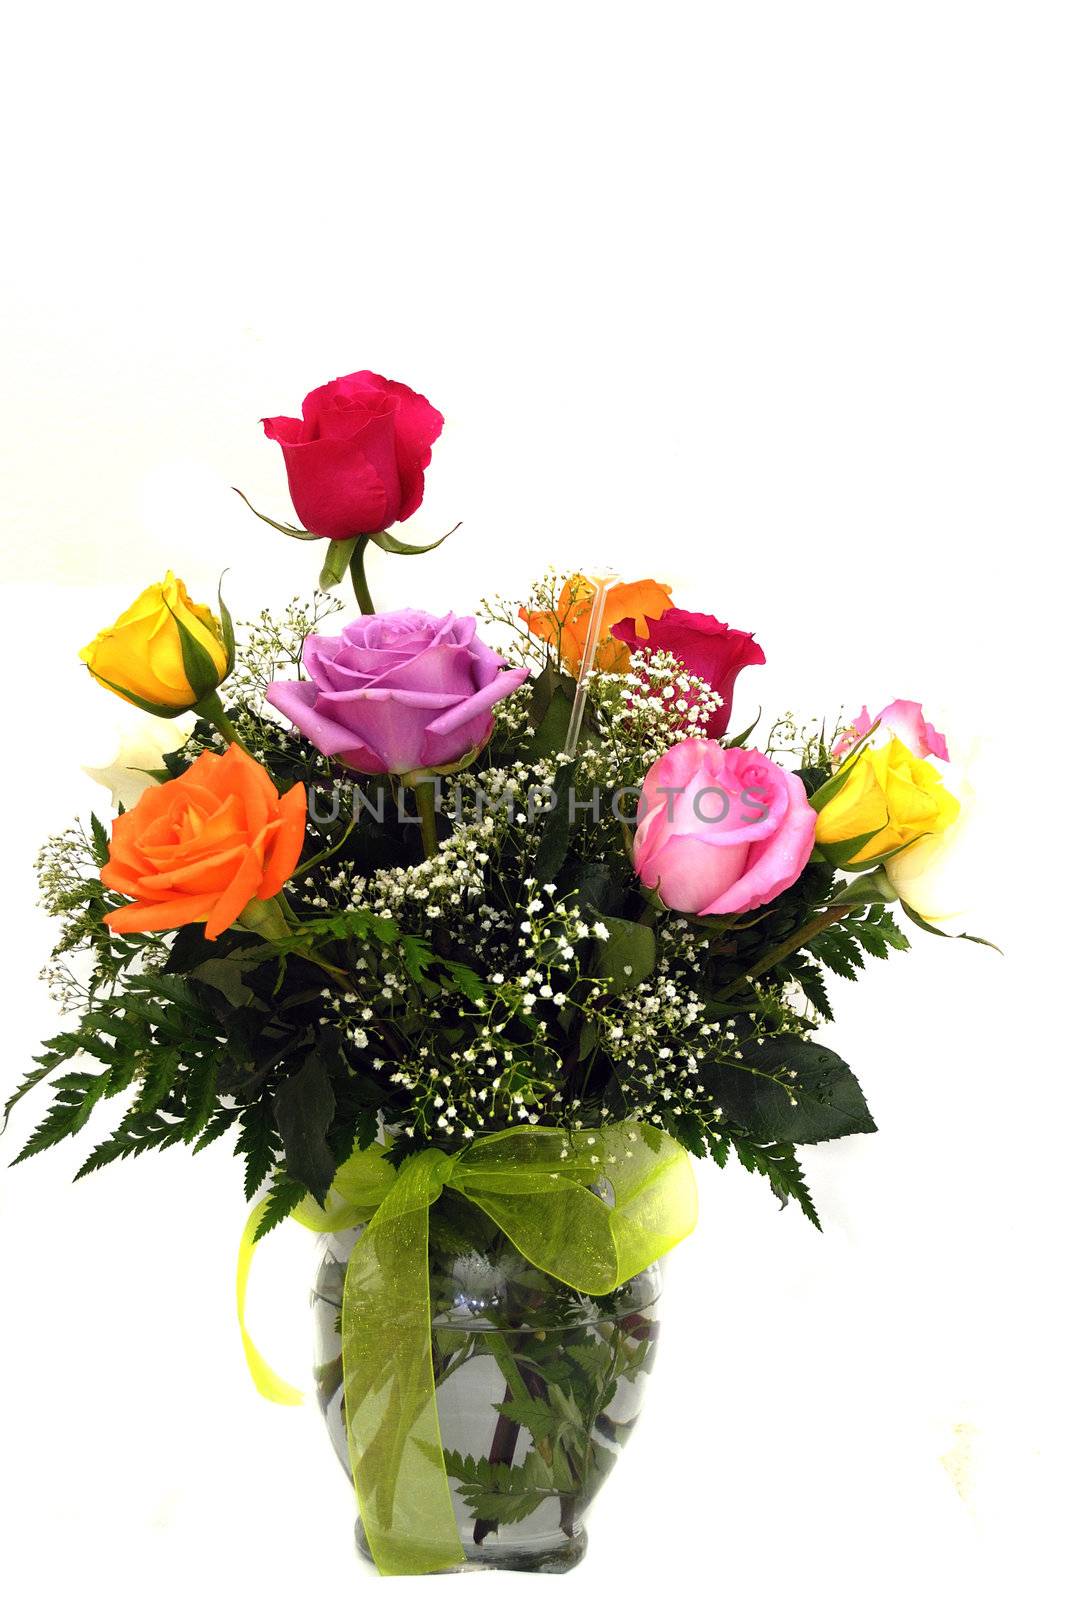 A beautiful vase of roses as an valentine gift